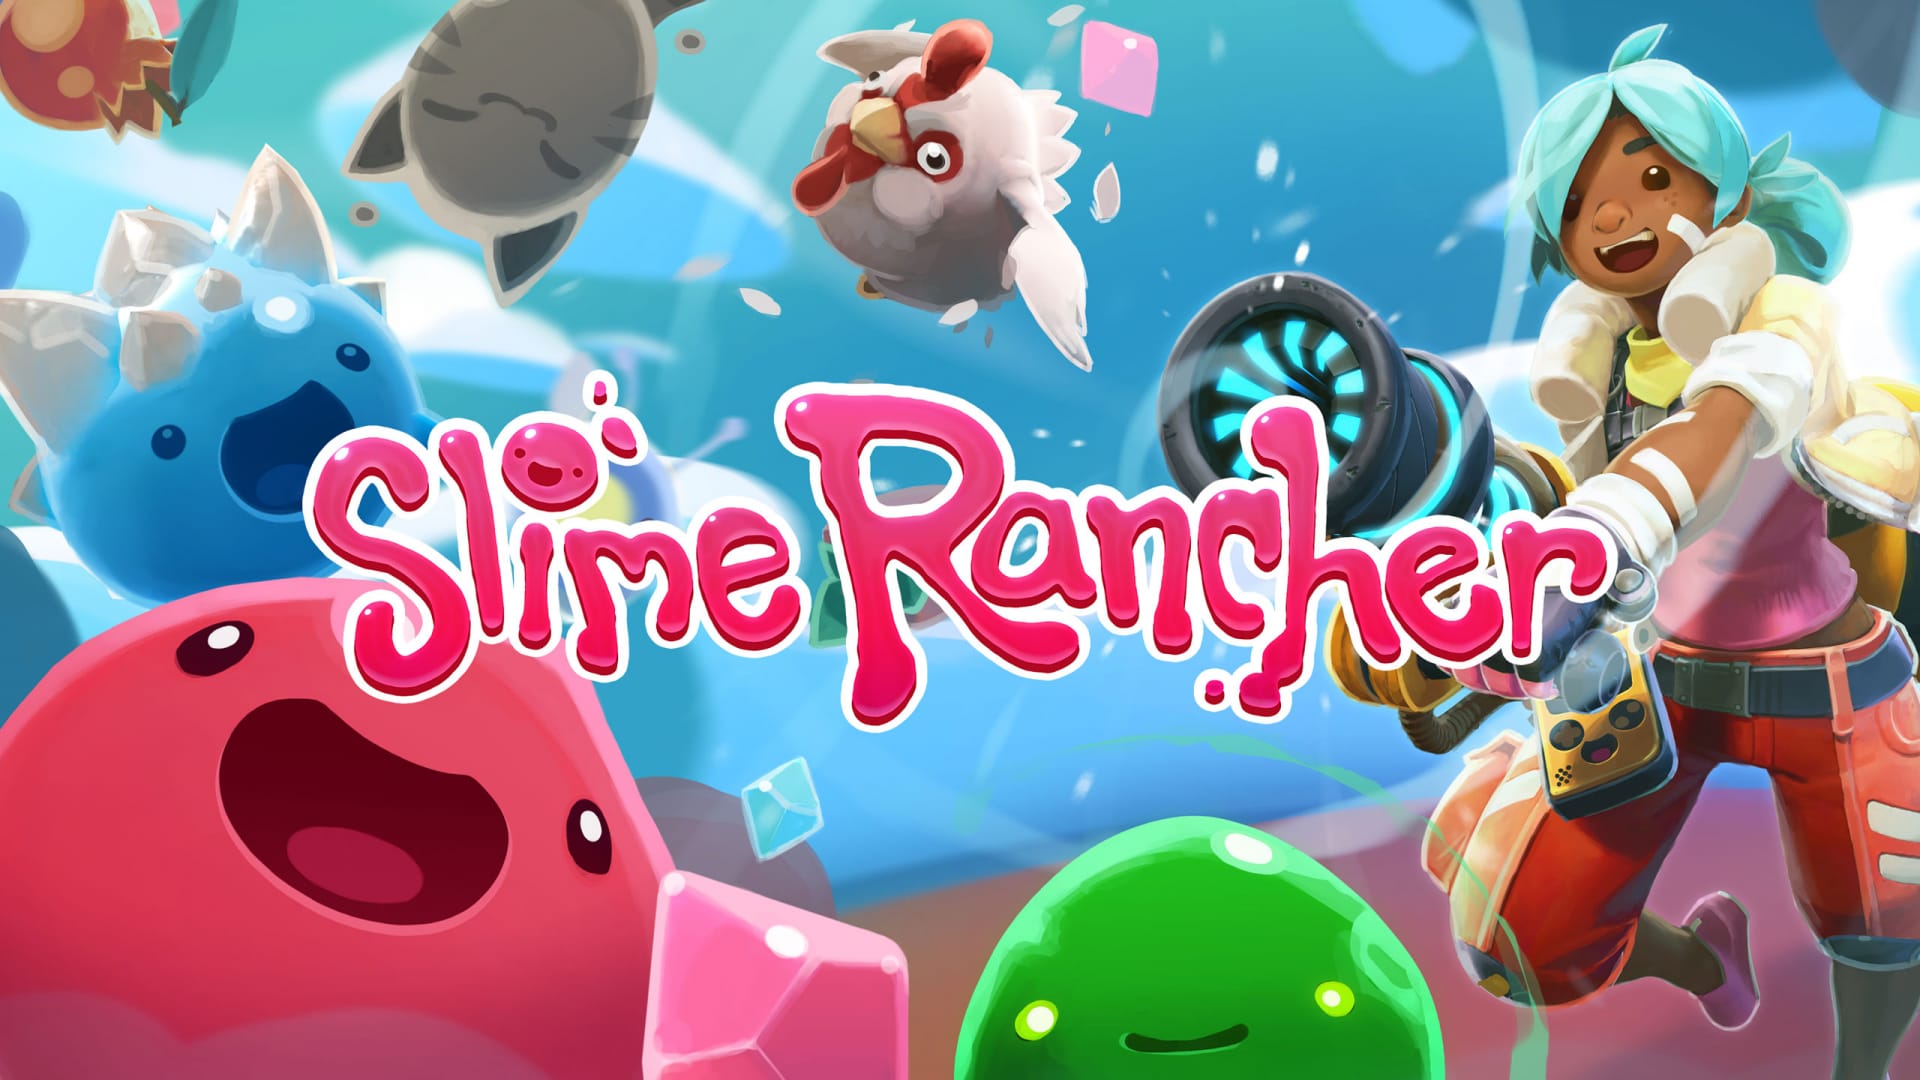 Slime Rancher Load Screen from Steam